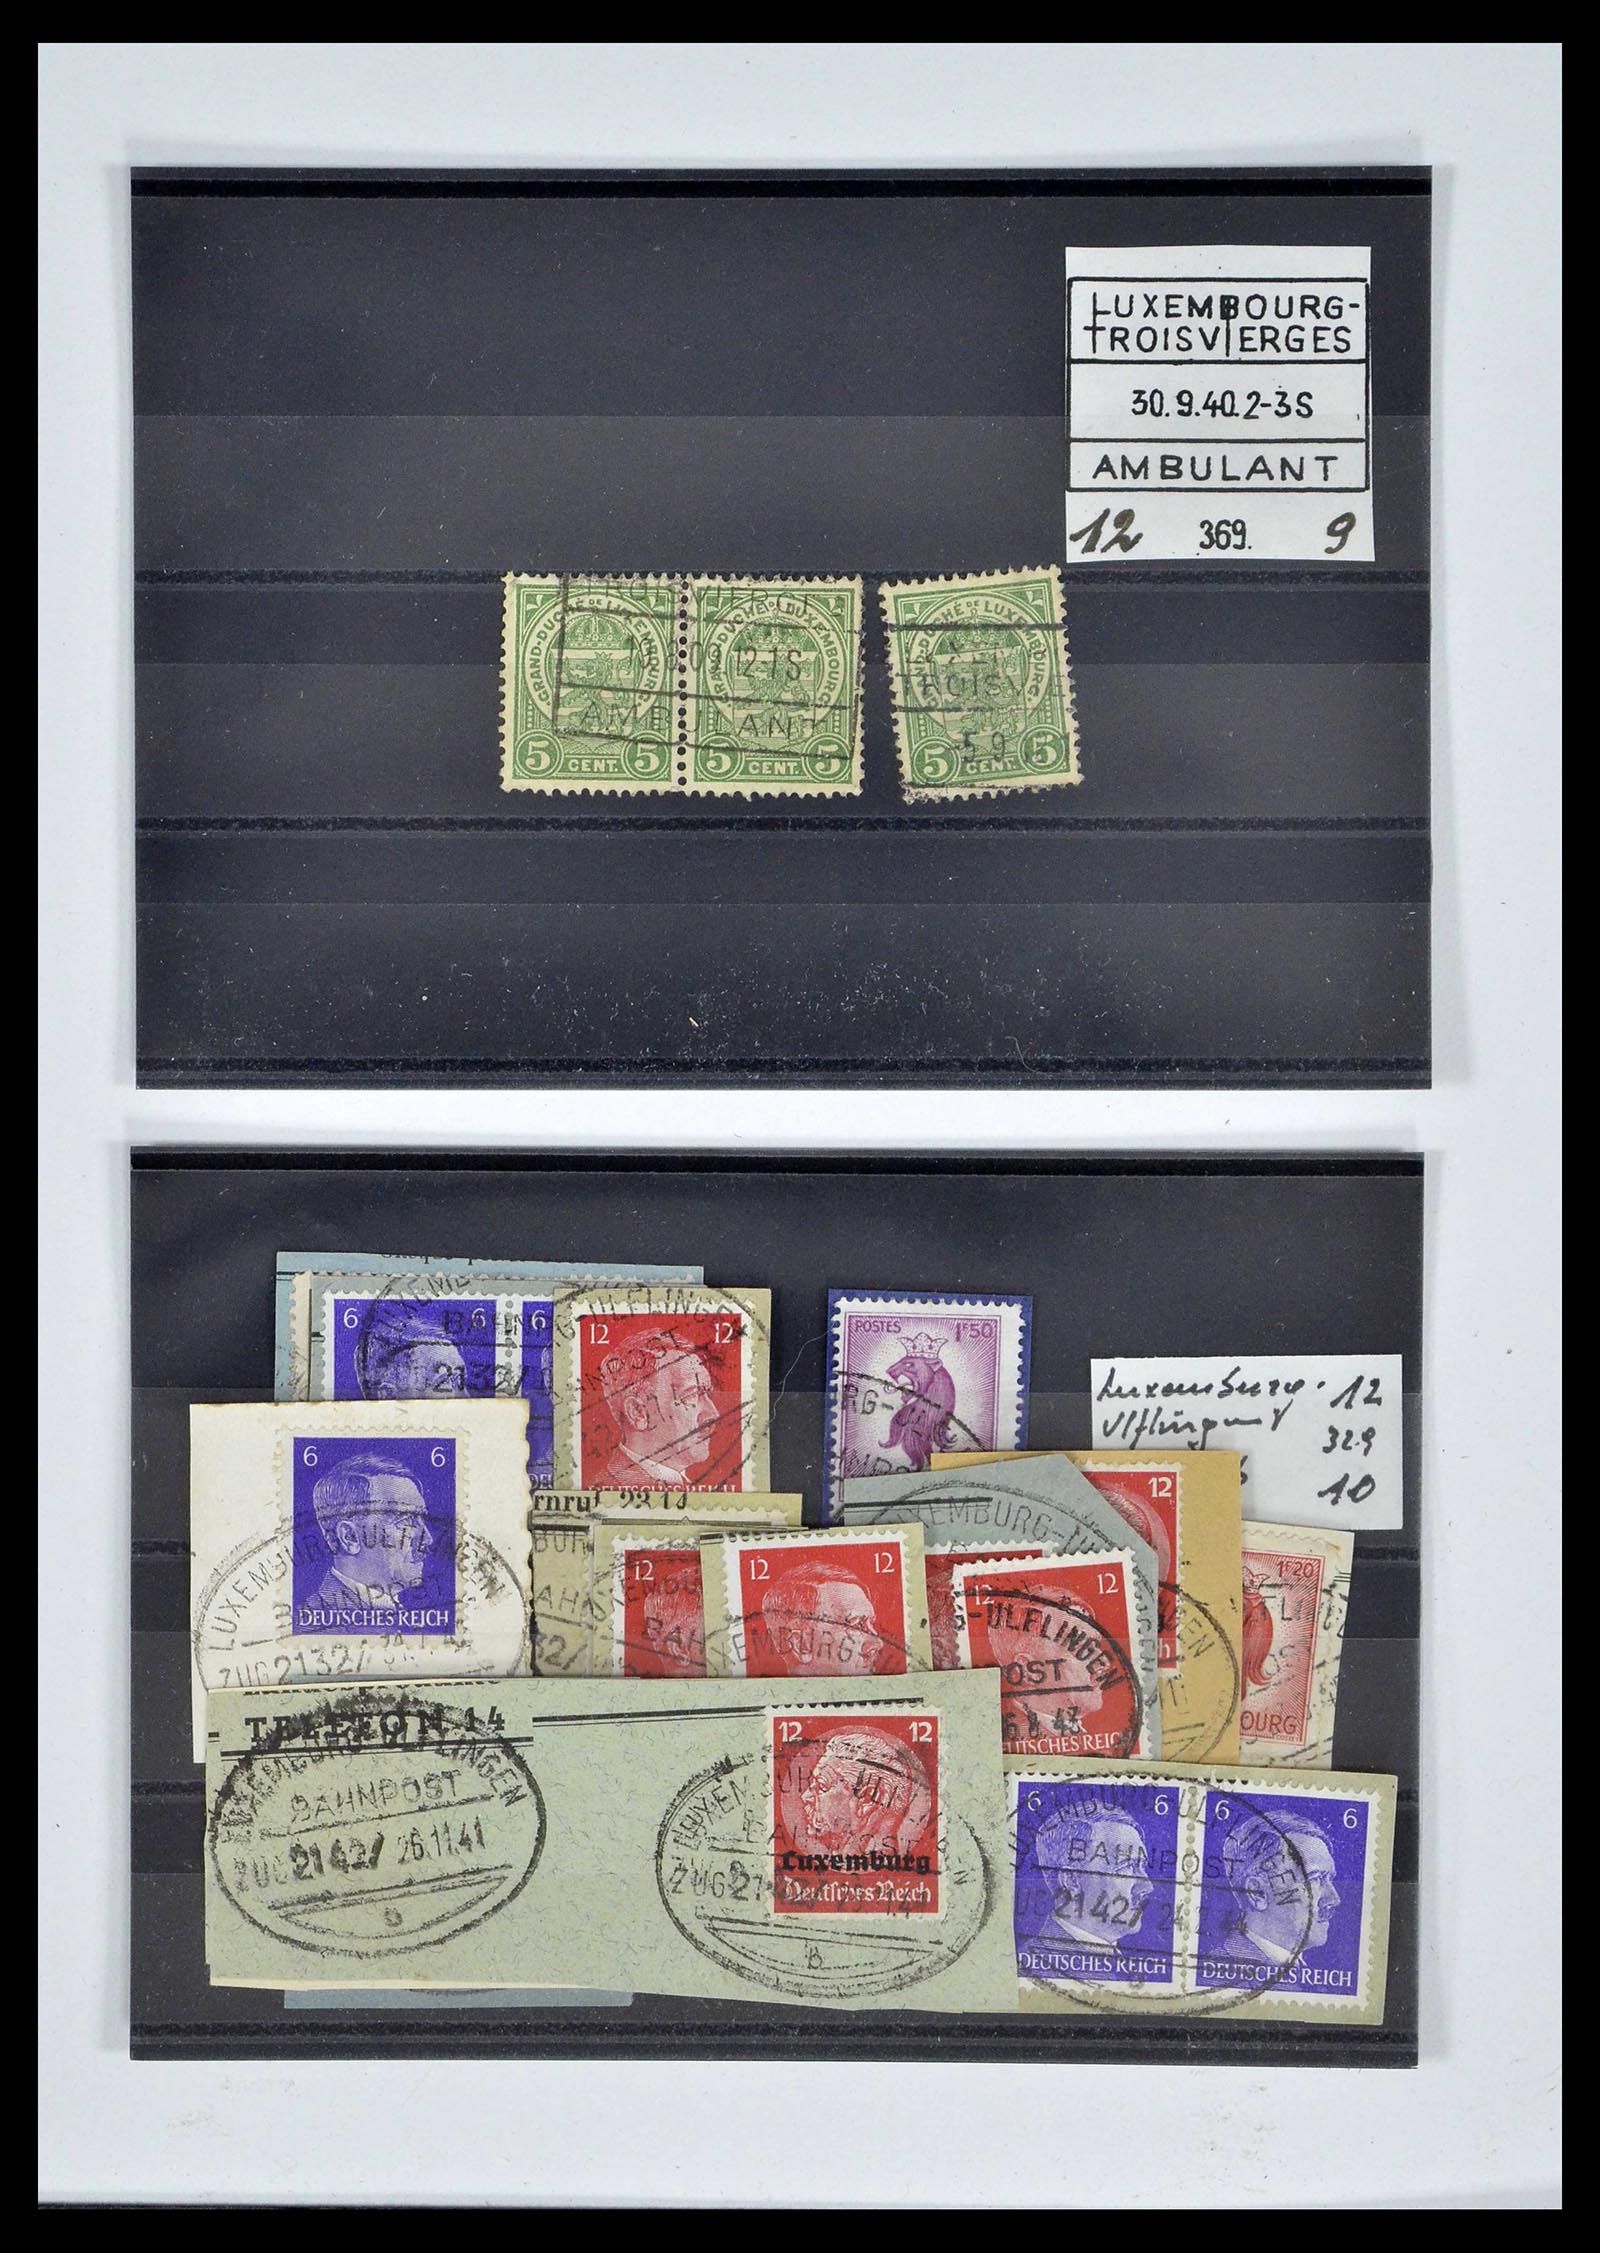 38876 0110 - Stamp collection 38876 Luxembourg train cancels 1890-1950.